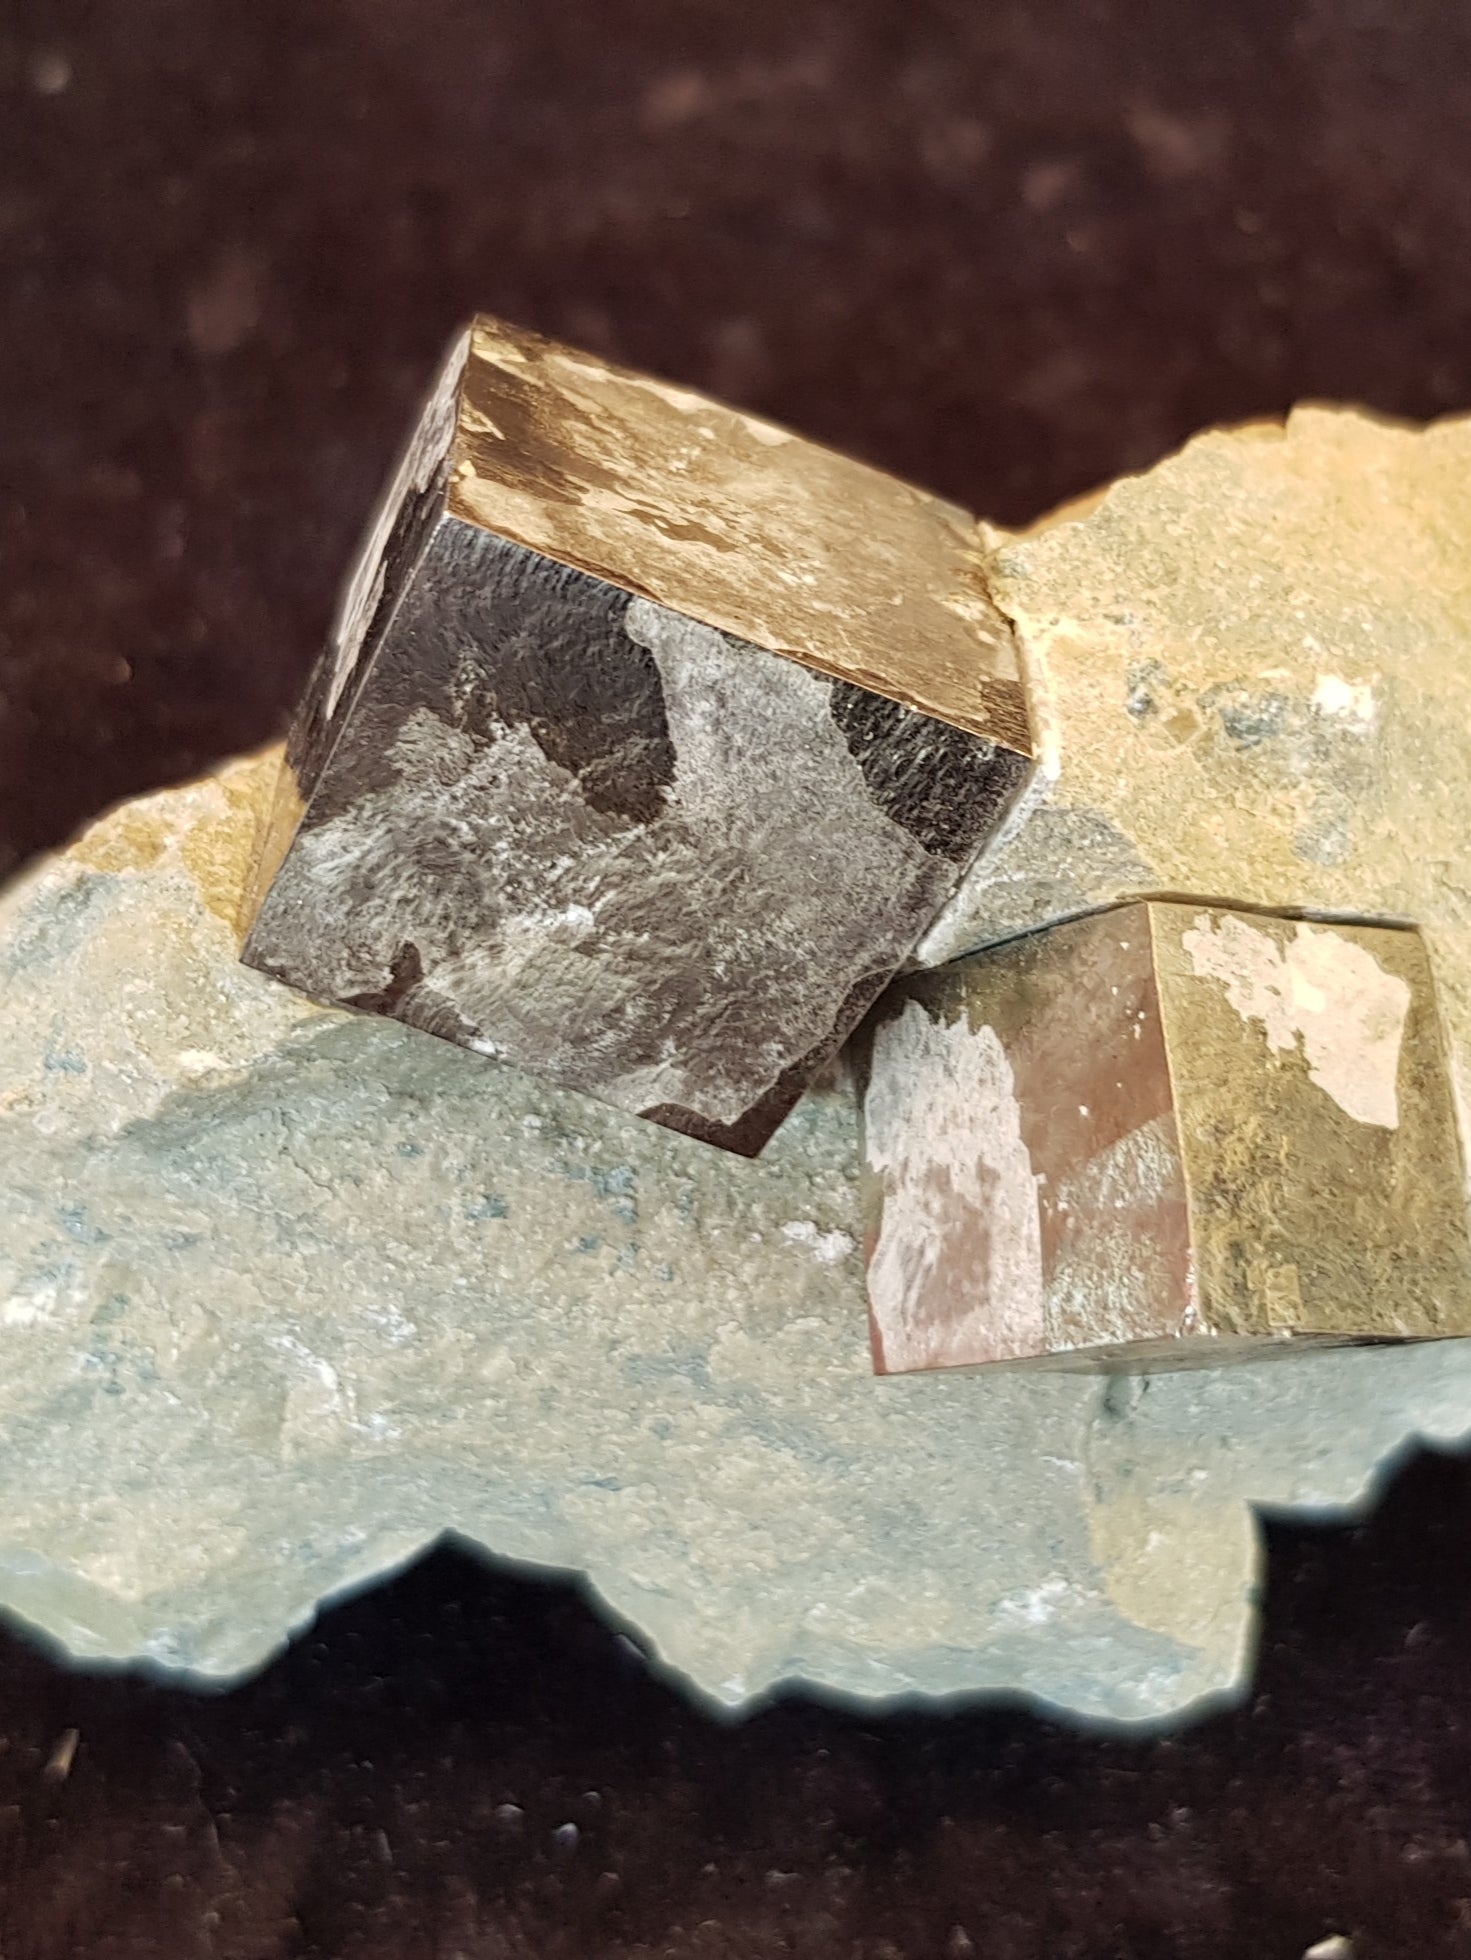 Iron pyrite crystals in marl - The Science of Magic 